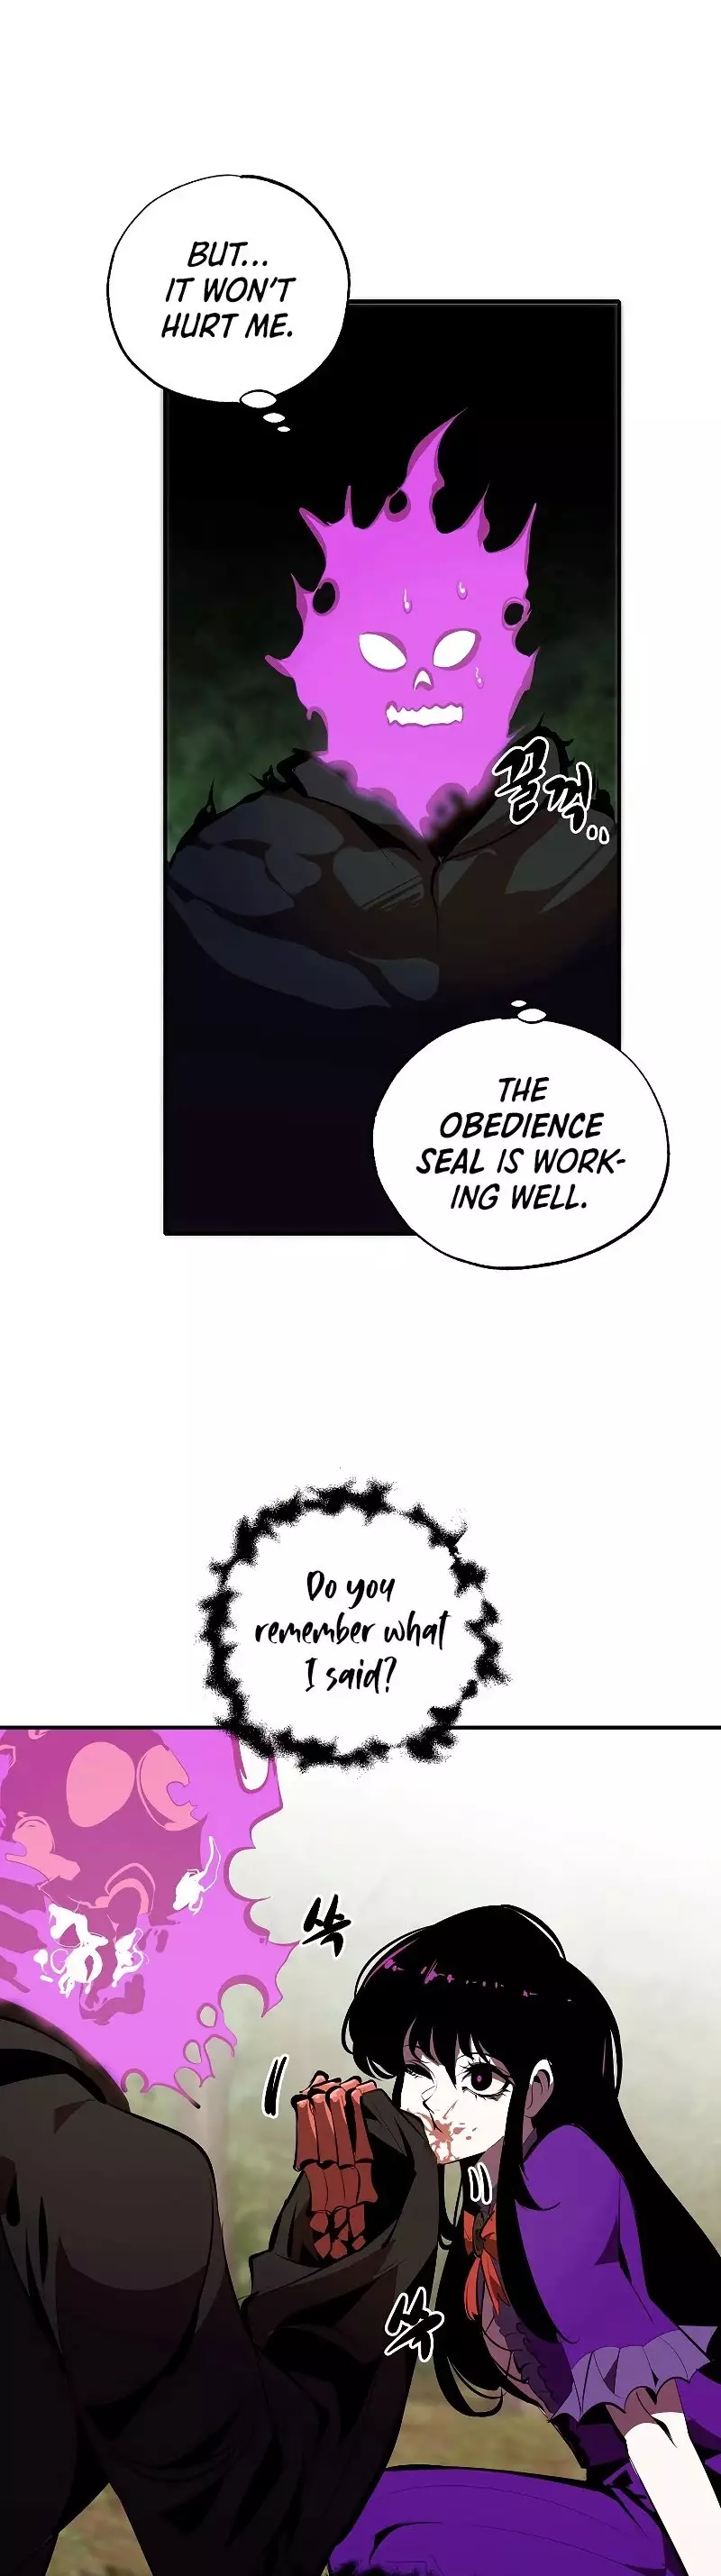 Worthless Regression - 32 page 7-fe8f5292